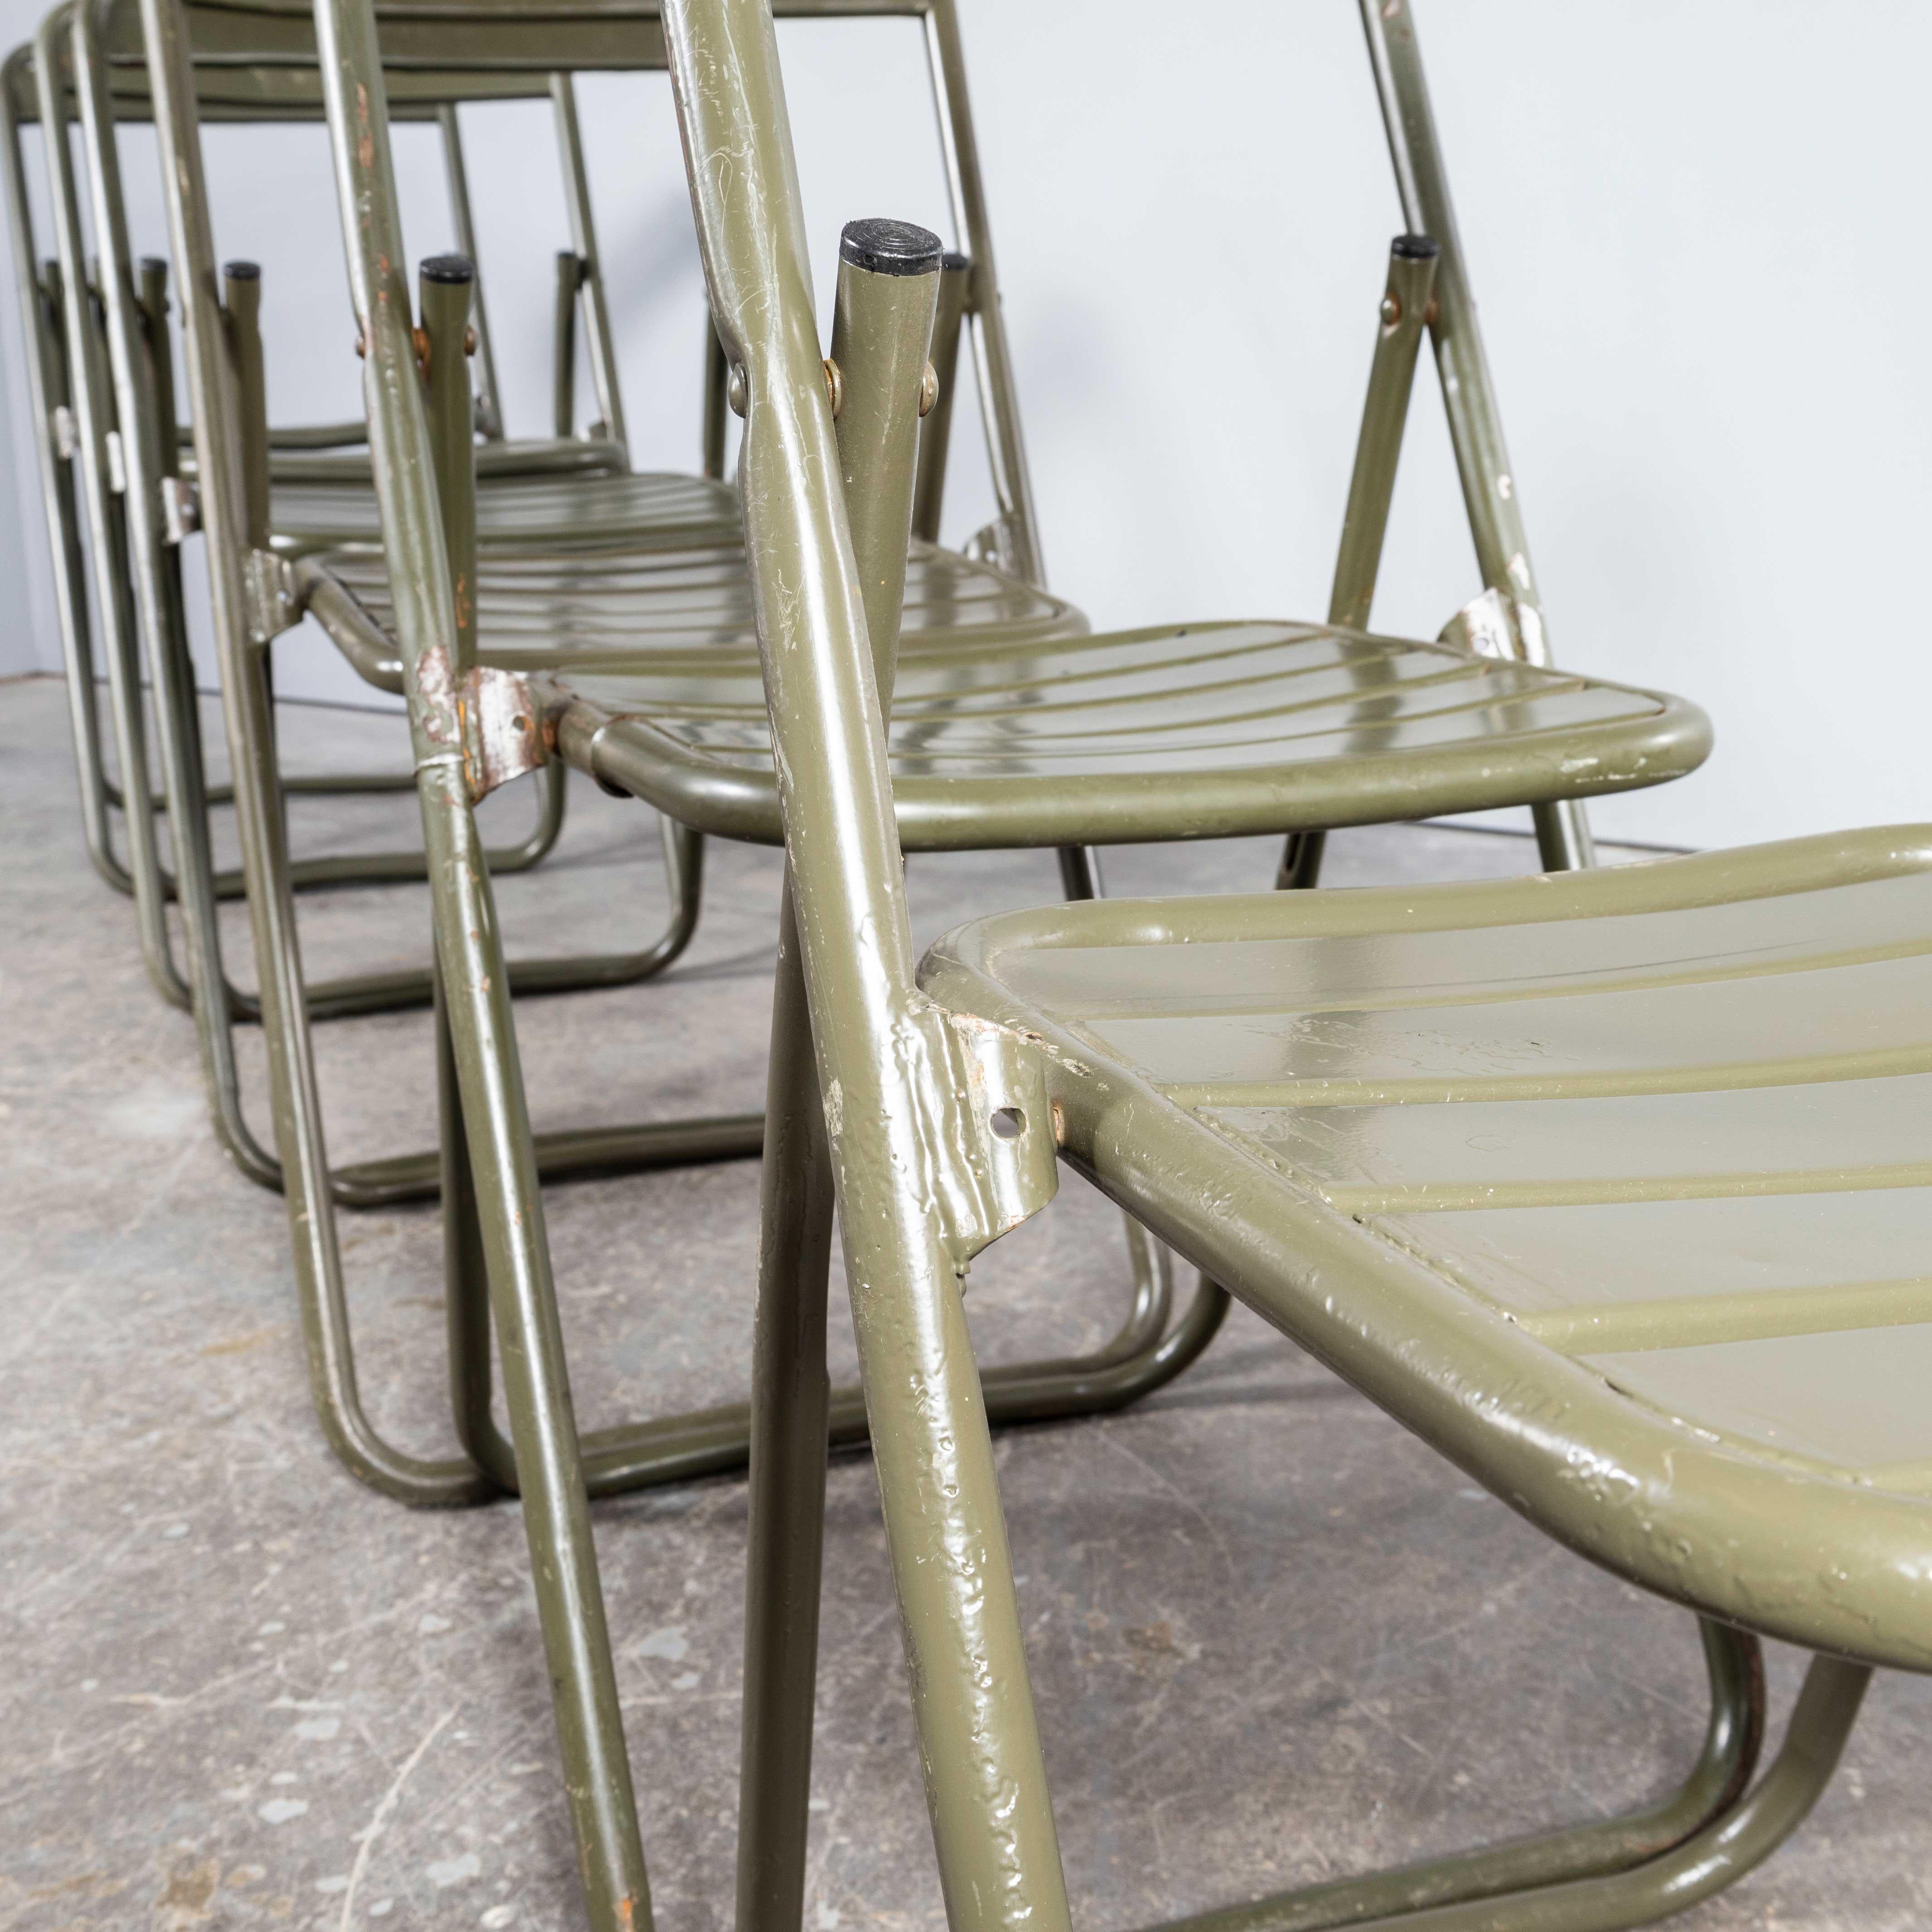 1970's New Old Stock Original French Army Surplus Folding Chairs - Very Large Qu For Sale 6